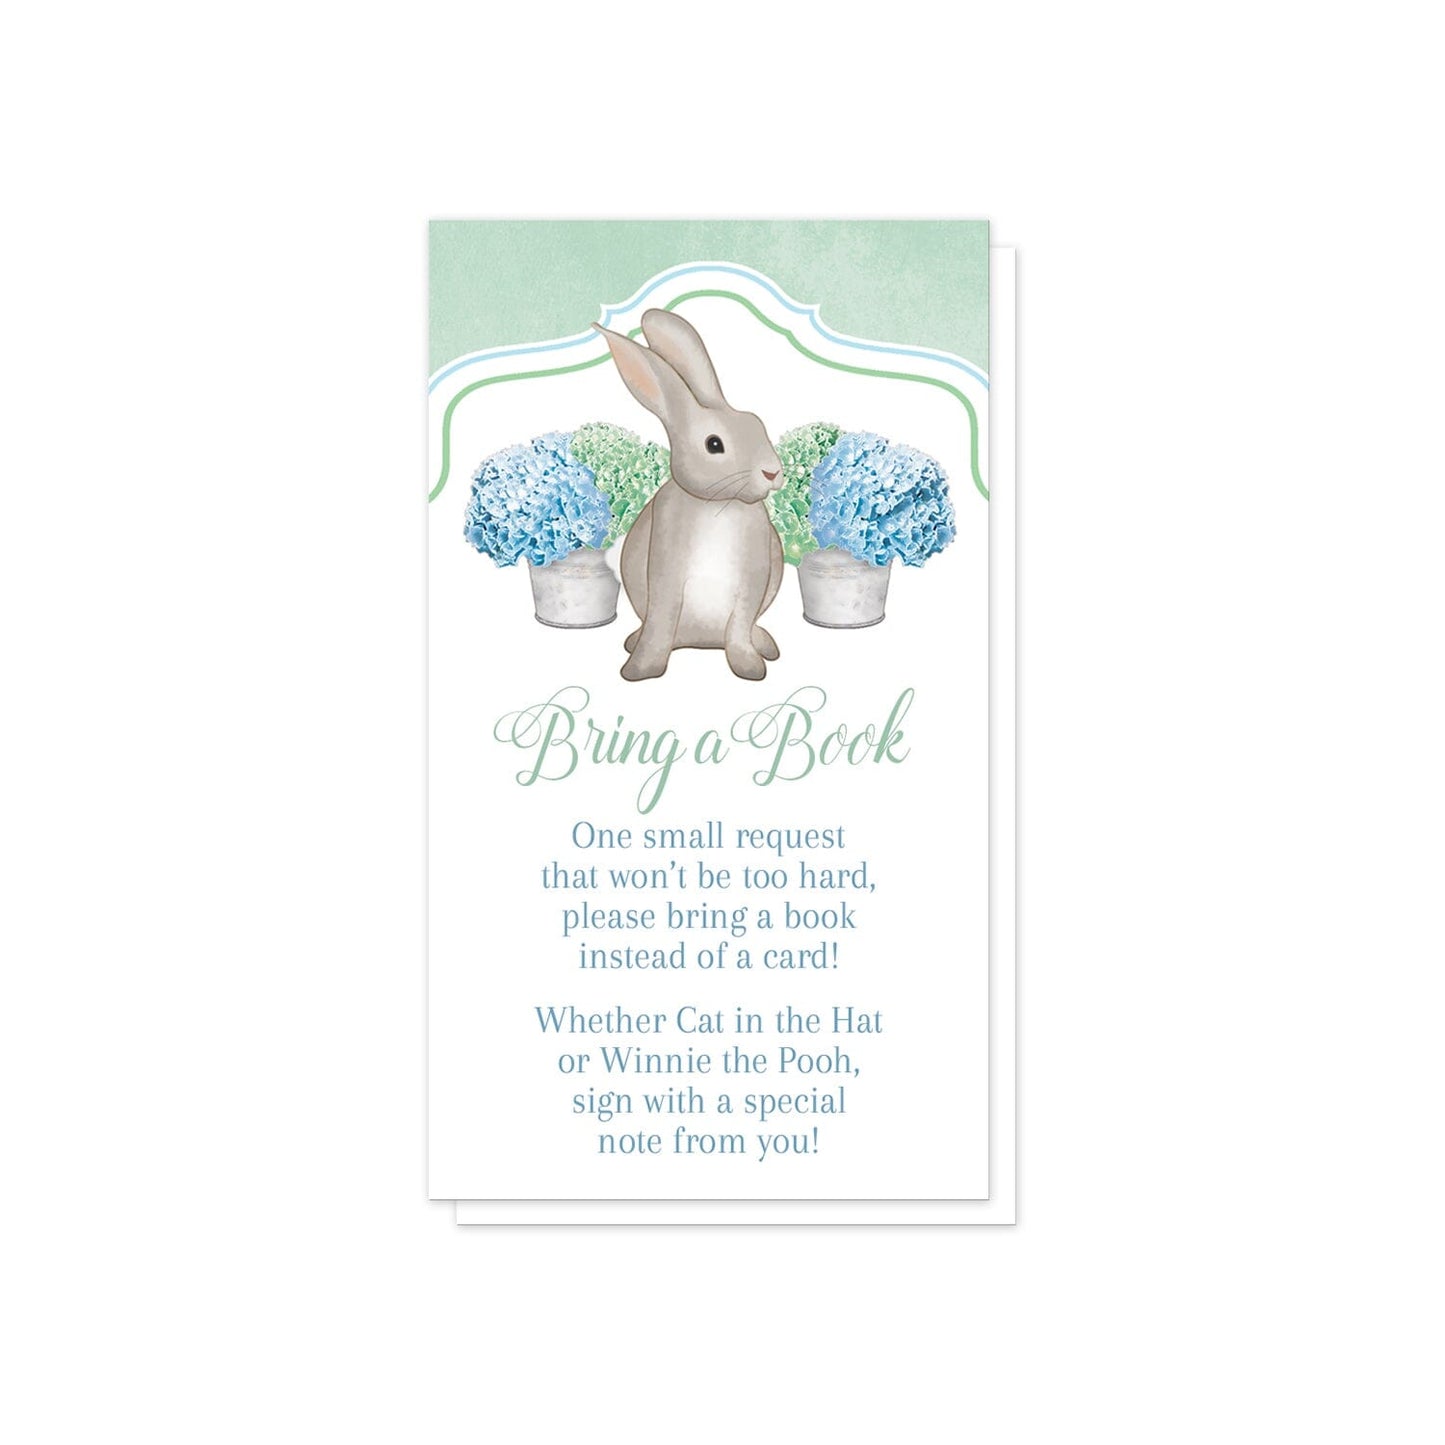 Mint Green Blue Hydrangea Rabbit Bring a Book Cards at Artistically Invited. Adorable mint green blue hydrangea rabbit bring a book cards with a watercolor-inspired illustration of cute little brown bunny rabbit with blue and green hydrangea floral arrangements in tin buckets behind it and a rustic mint green background at the top. Your book request details are printed in green and blue on white below the cute rabbit. 